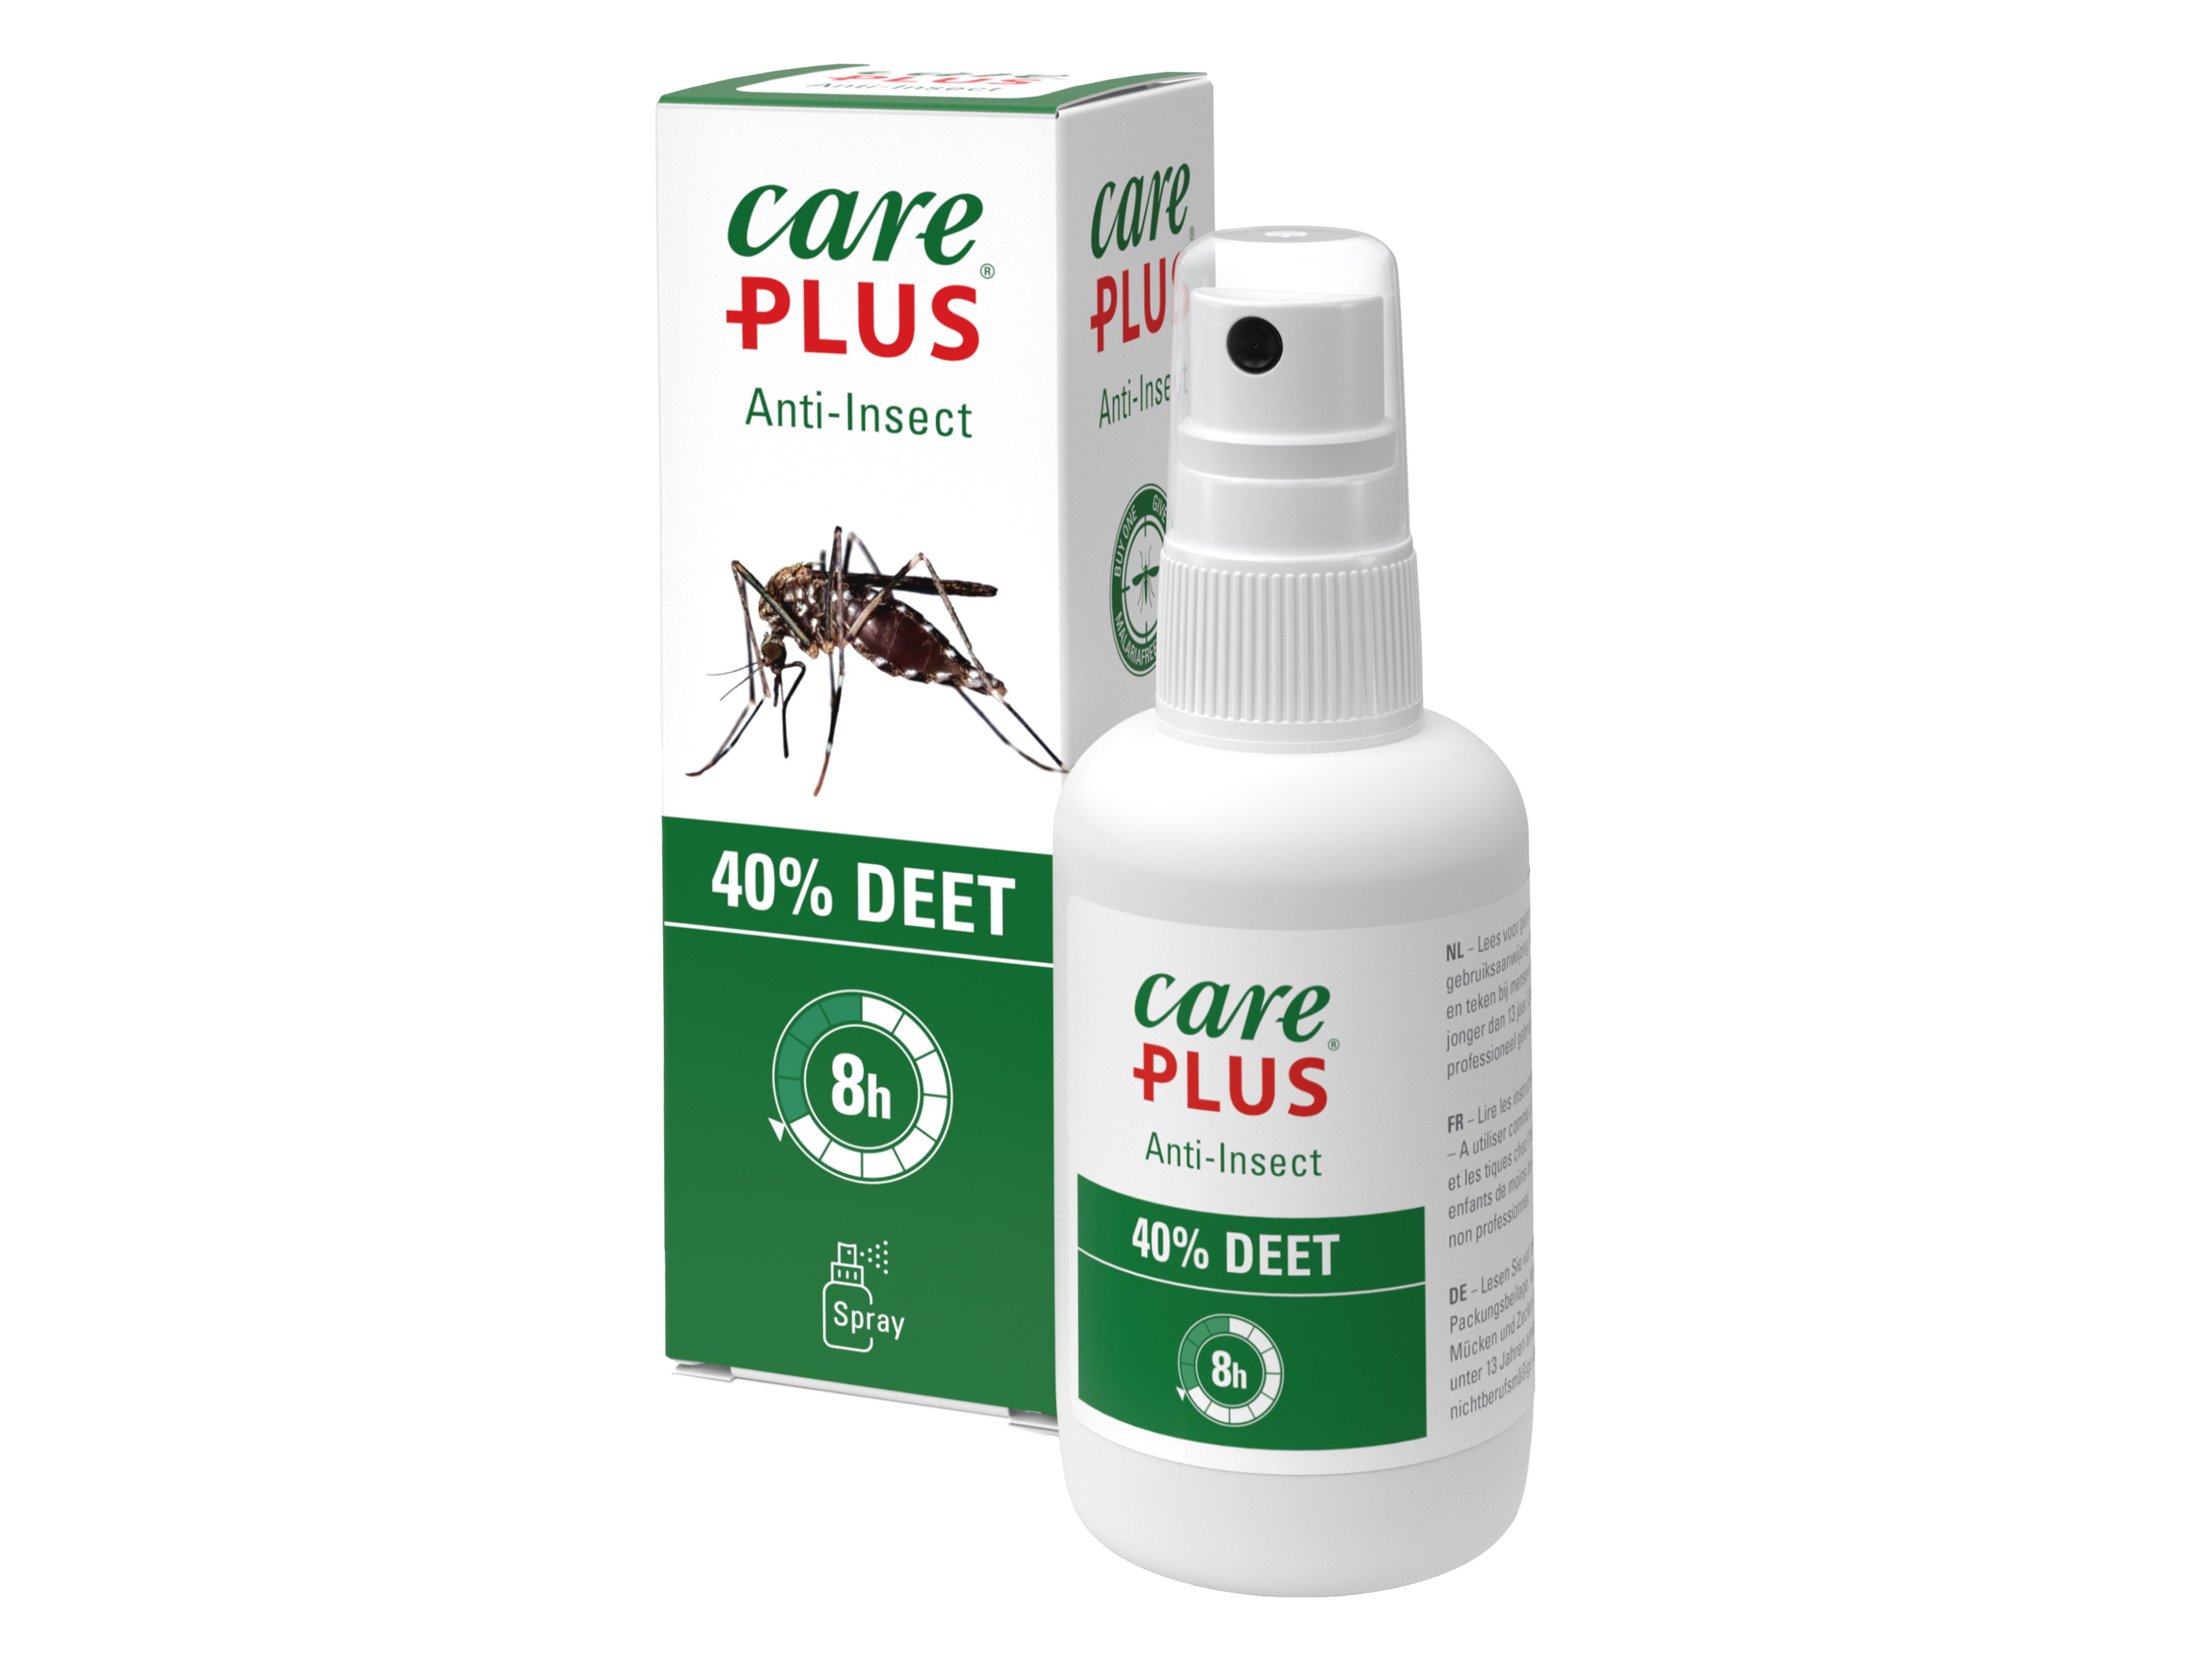 Care Plus Anti-Insect DEET 40%, spray, 60 ml